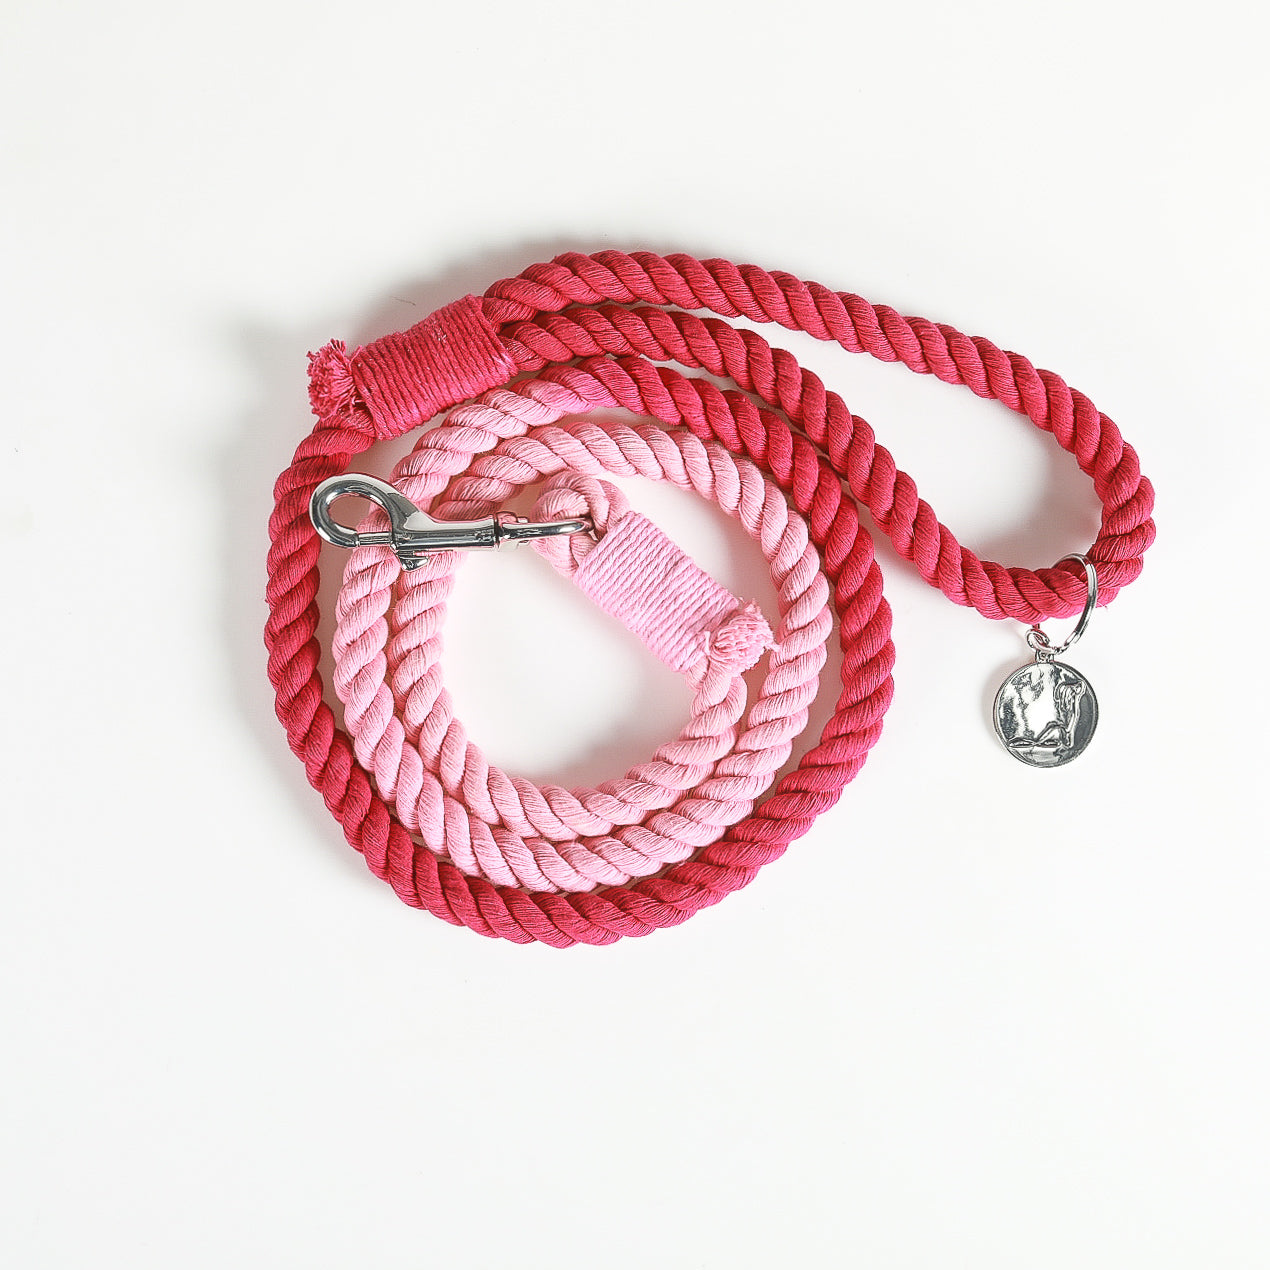 IMPERFECT ROPE LEASH - Love